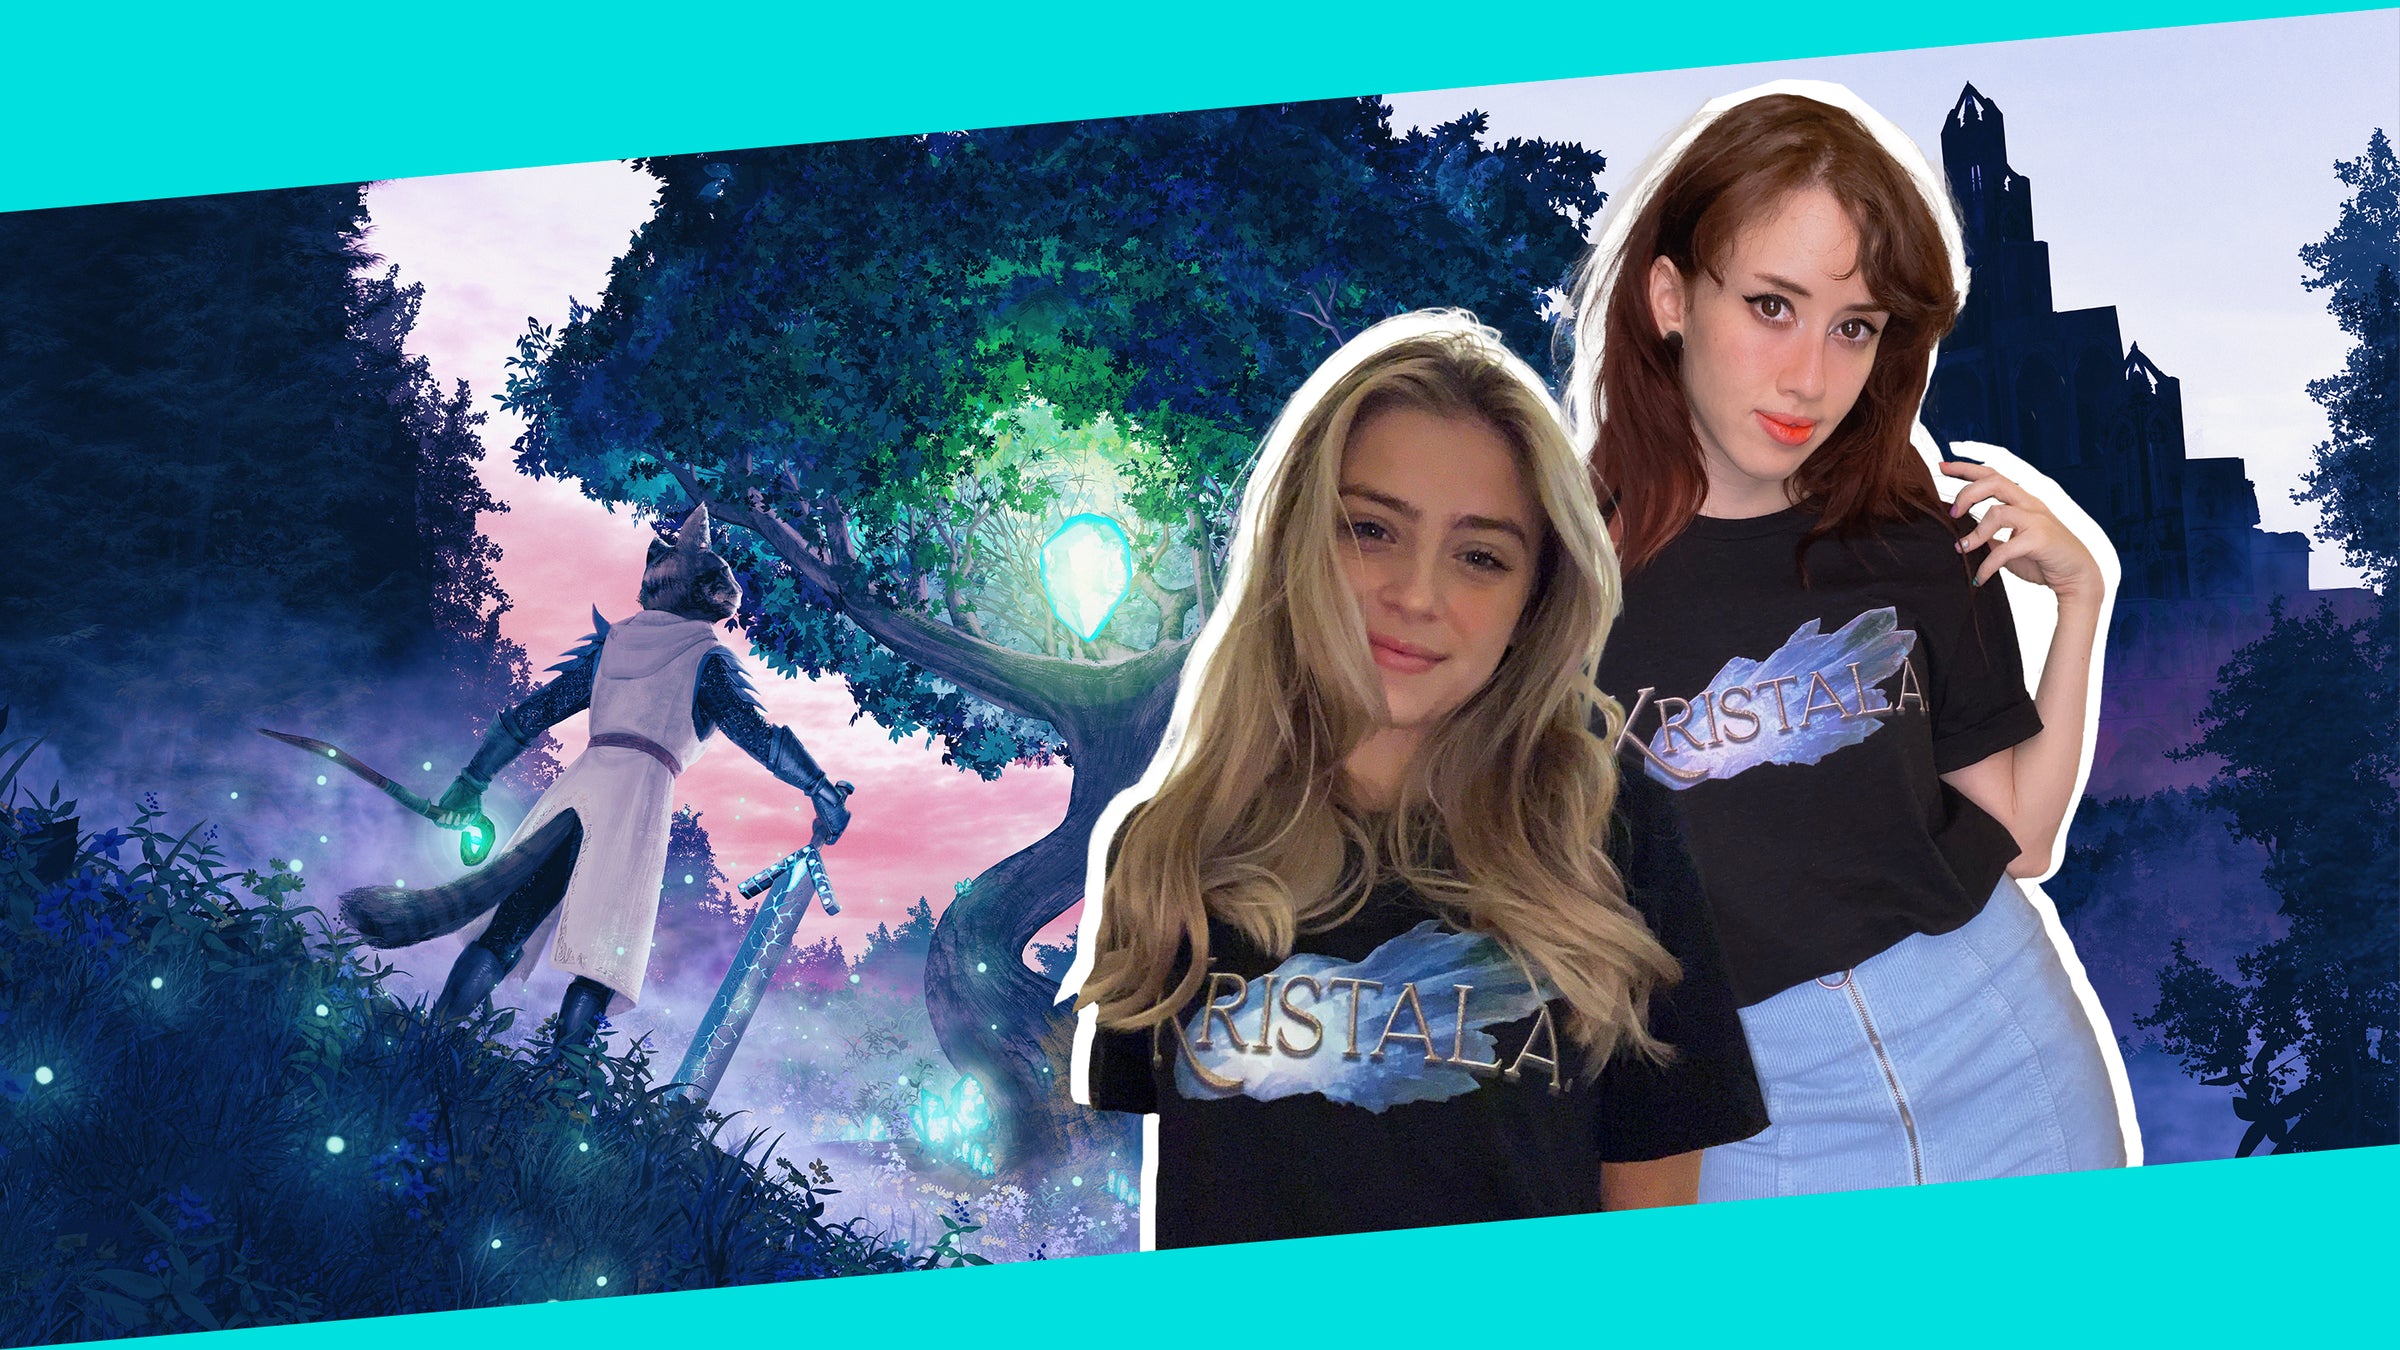 homepage banner showcasing two young women modeling kristala dark fantasy illustration t-shirts featuring the kristala game logo on the front and game illustrations on the back with hopeful kristalan illustration behind